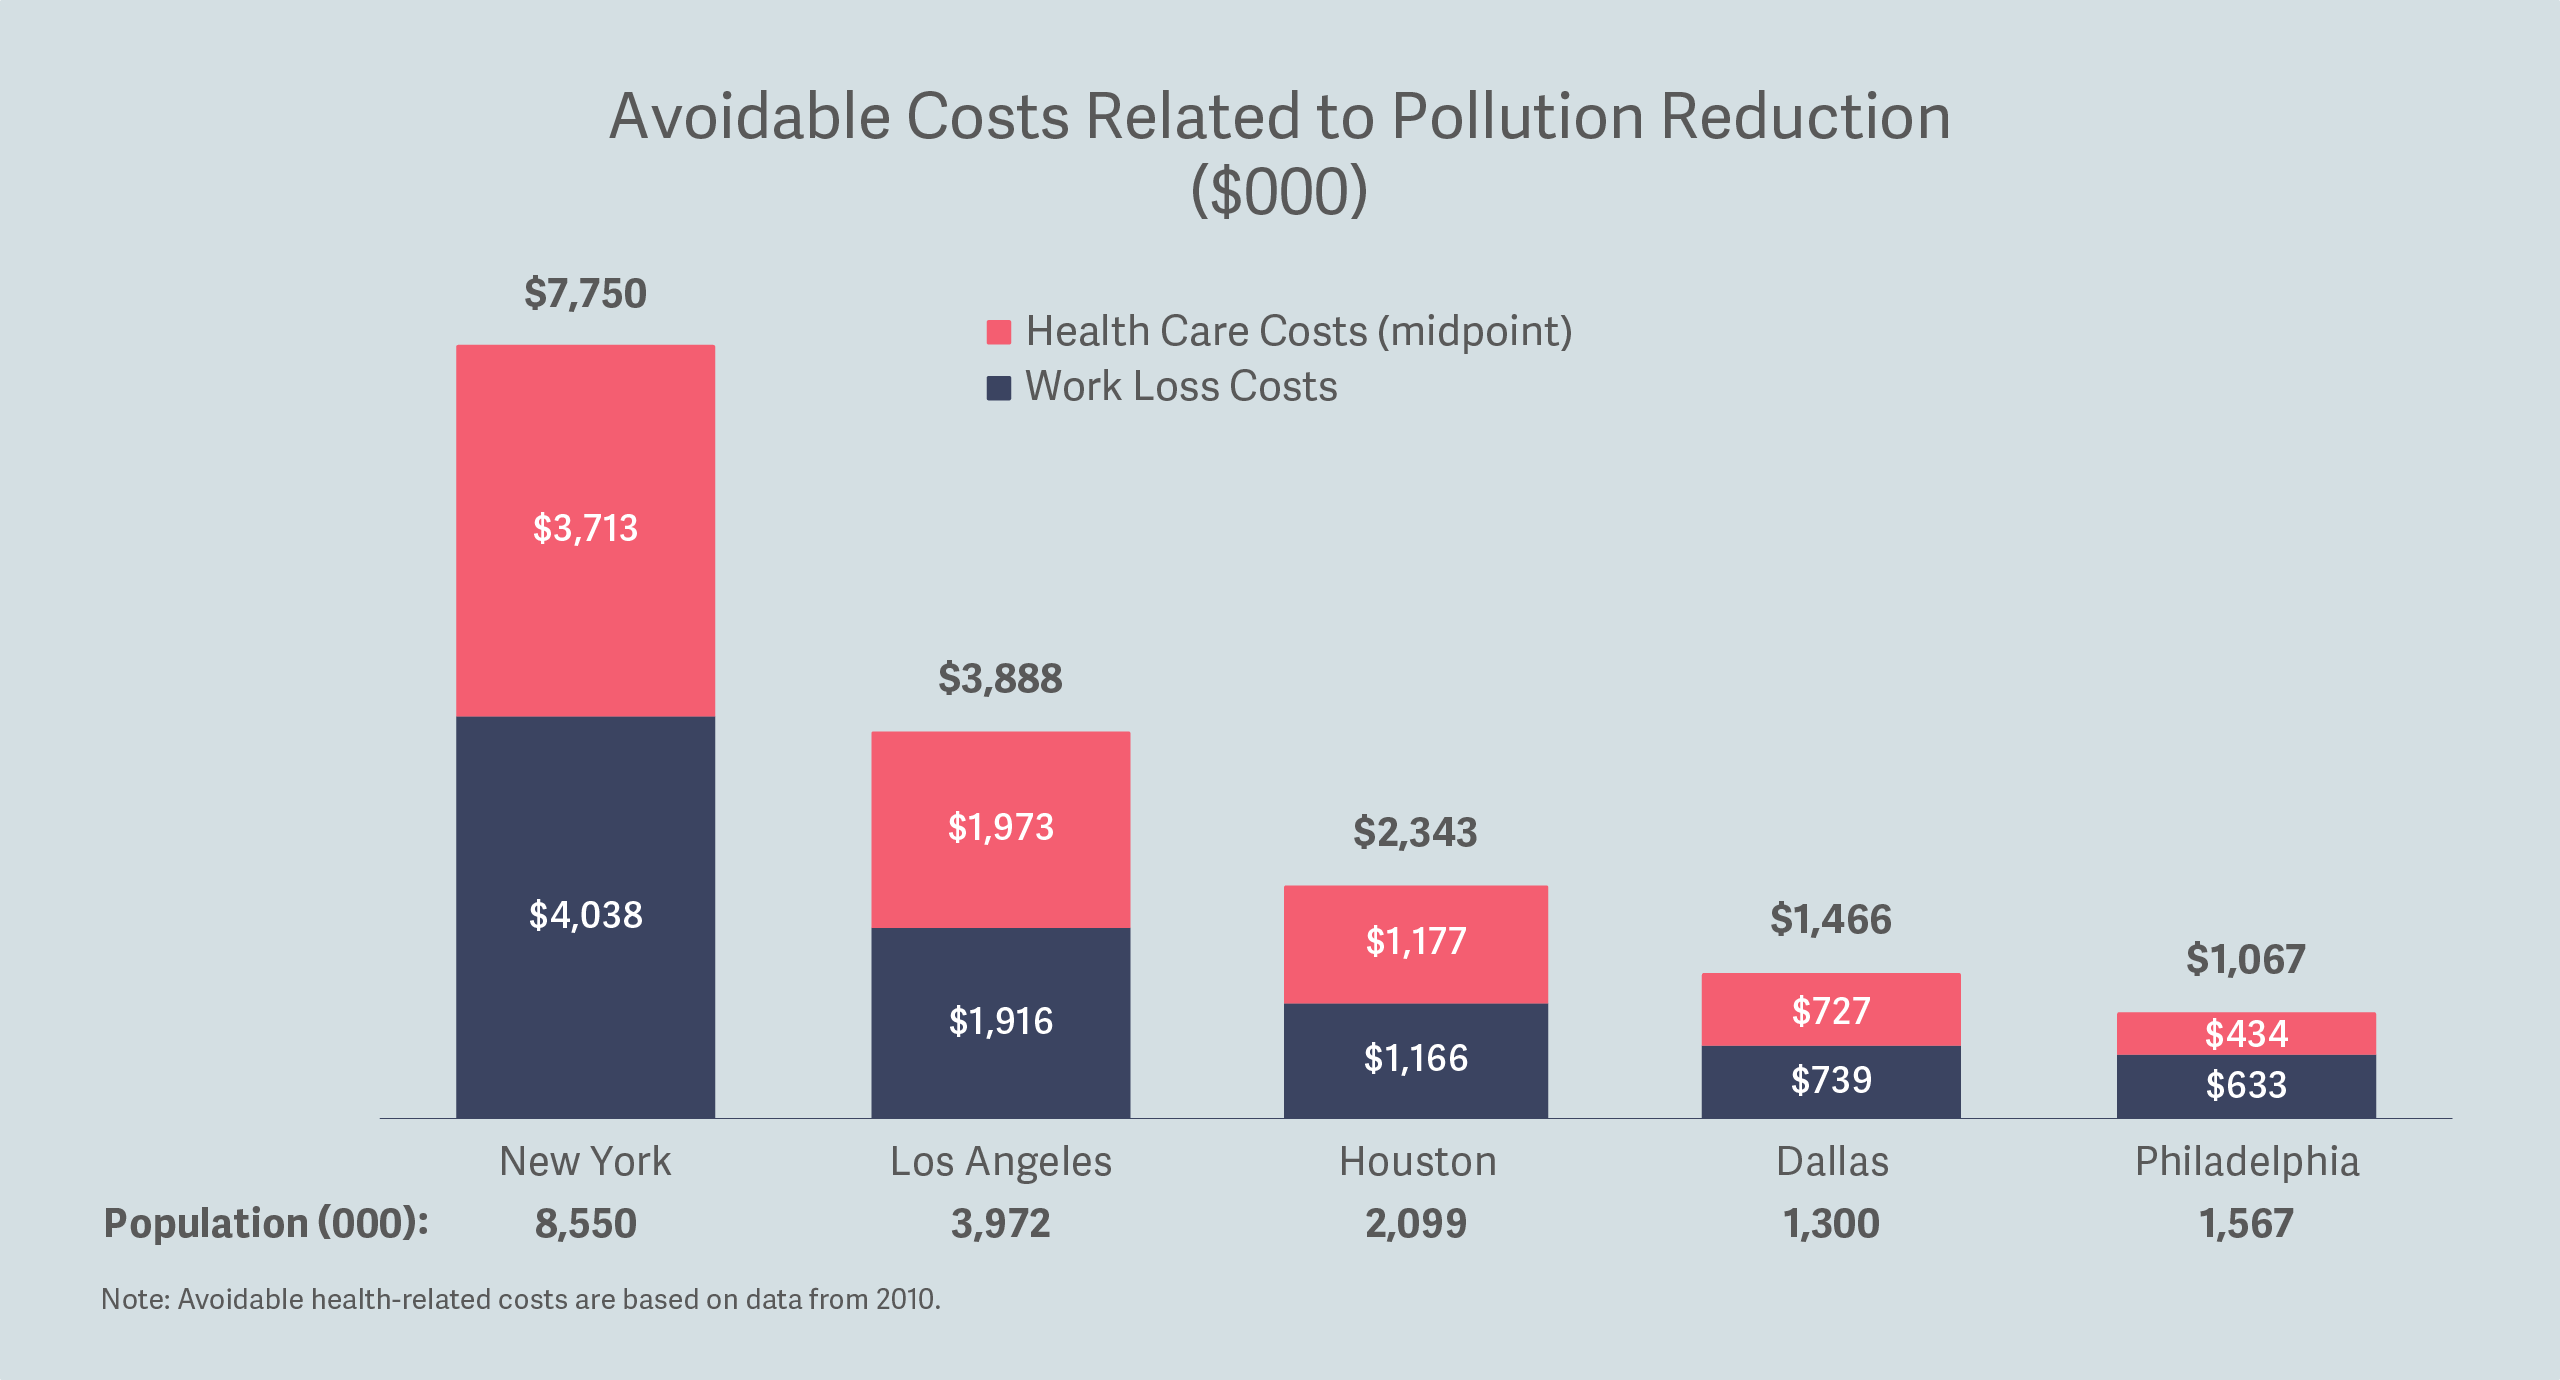 Avoidable Costs Related to Pollution Reduction